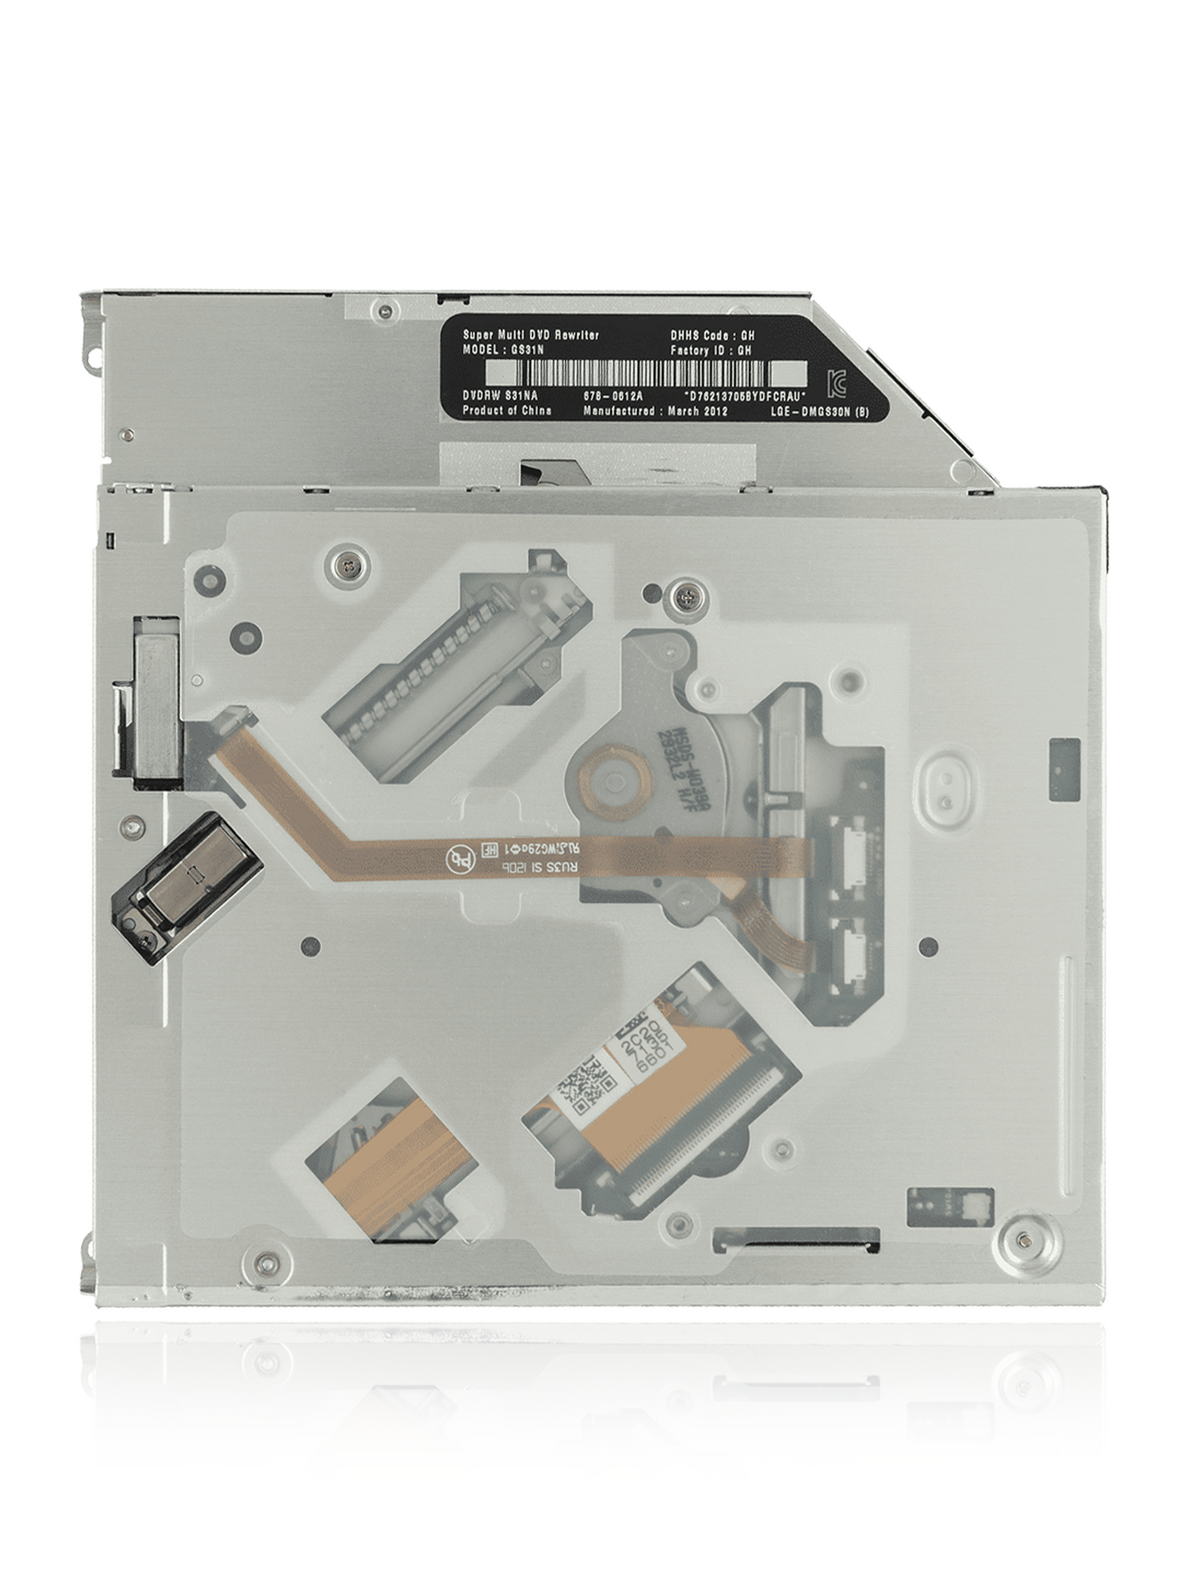 DVDRW SUPERDRIVE (GS23N) FOR MACBOOK PRO UNIBODY 13"/15"/ 17" (A1278 / A1286 / A1297 / A1342 (MID 2009 TO MID 2012)